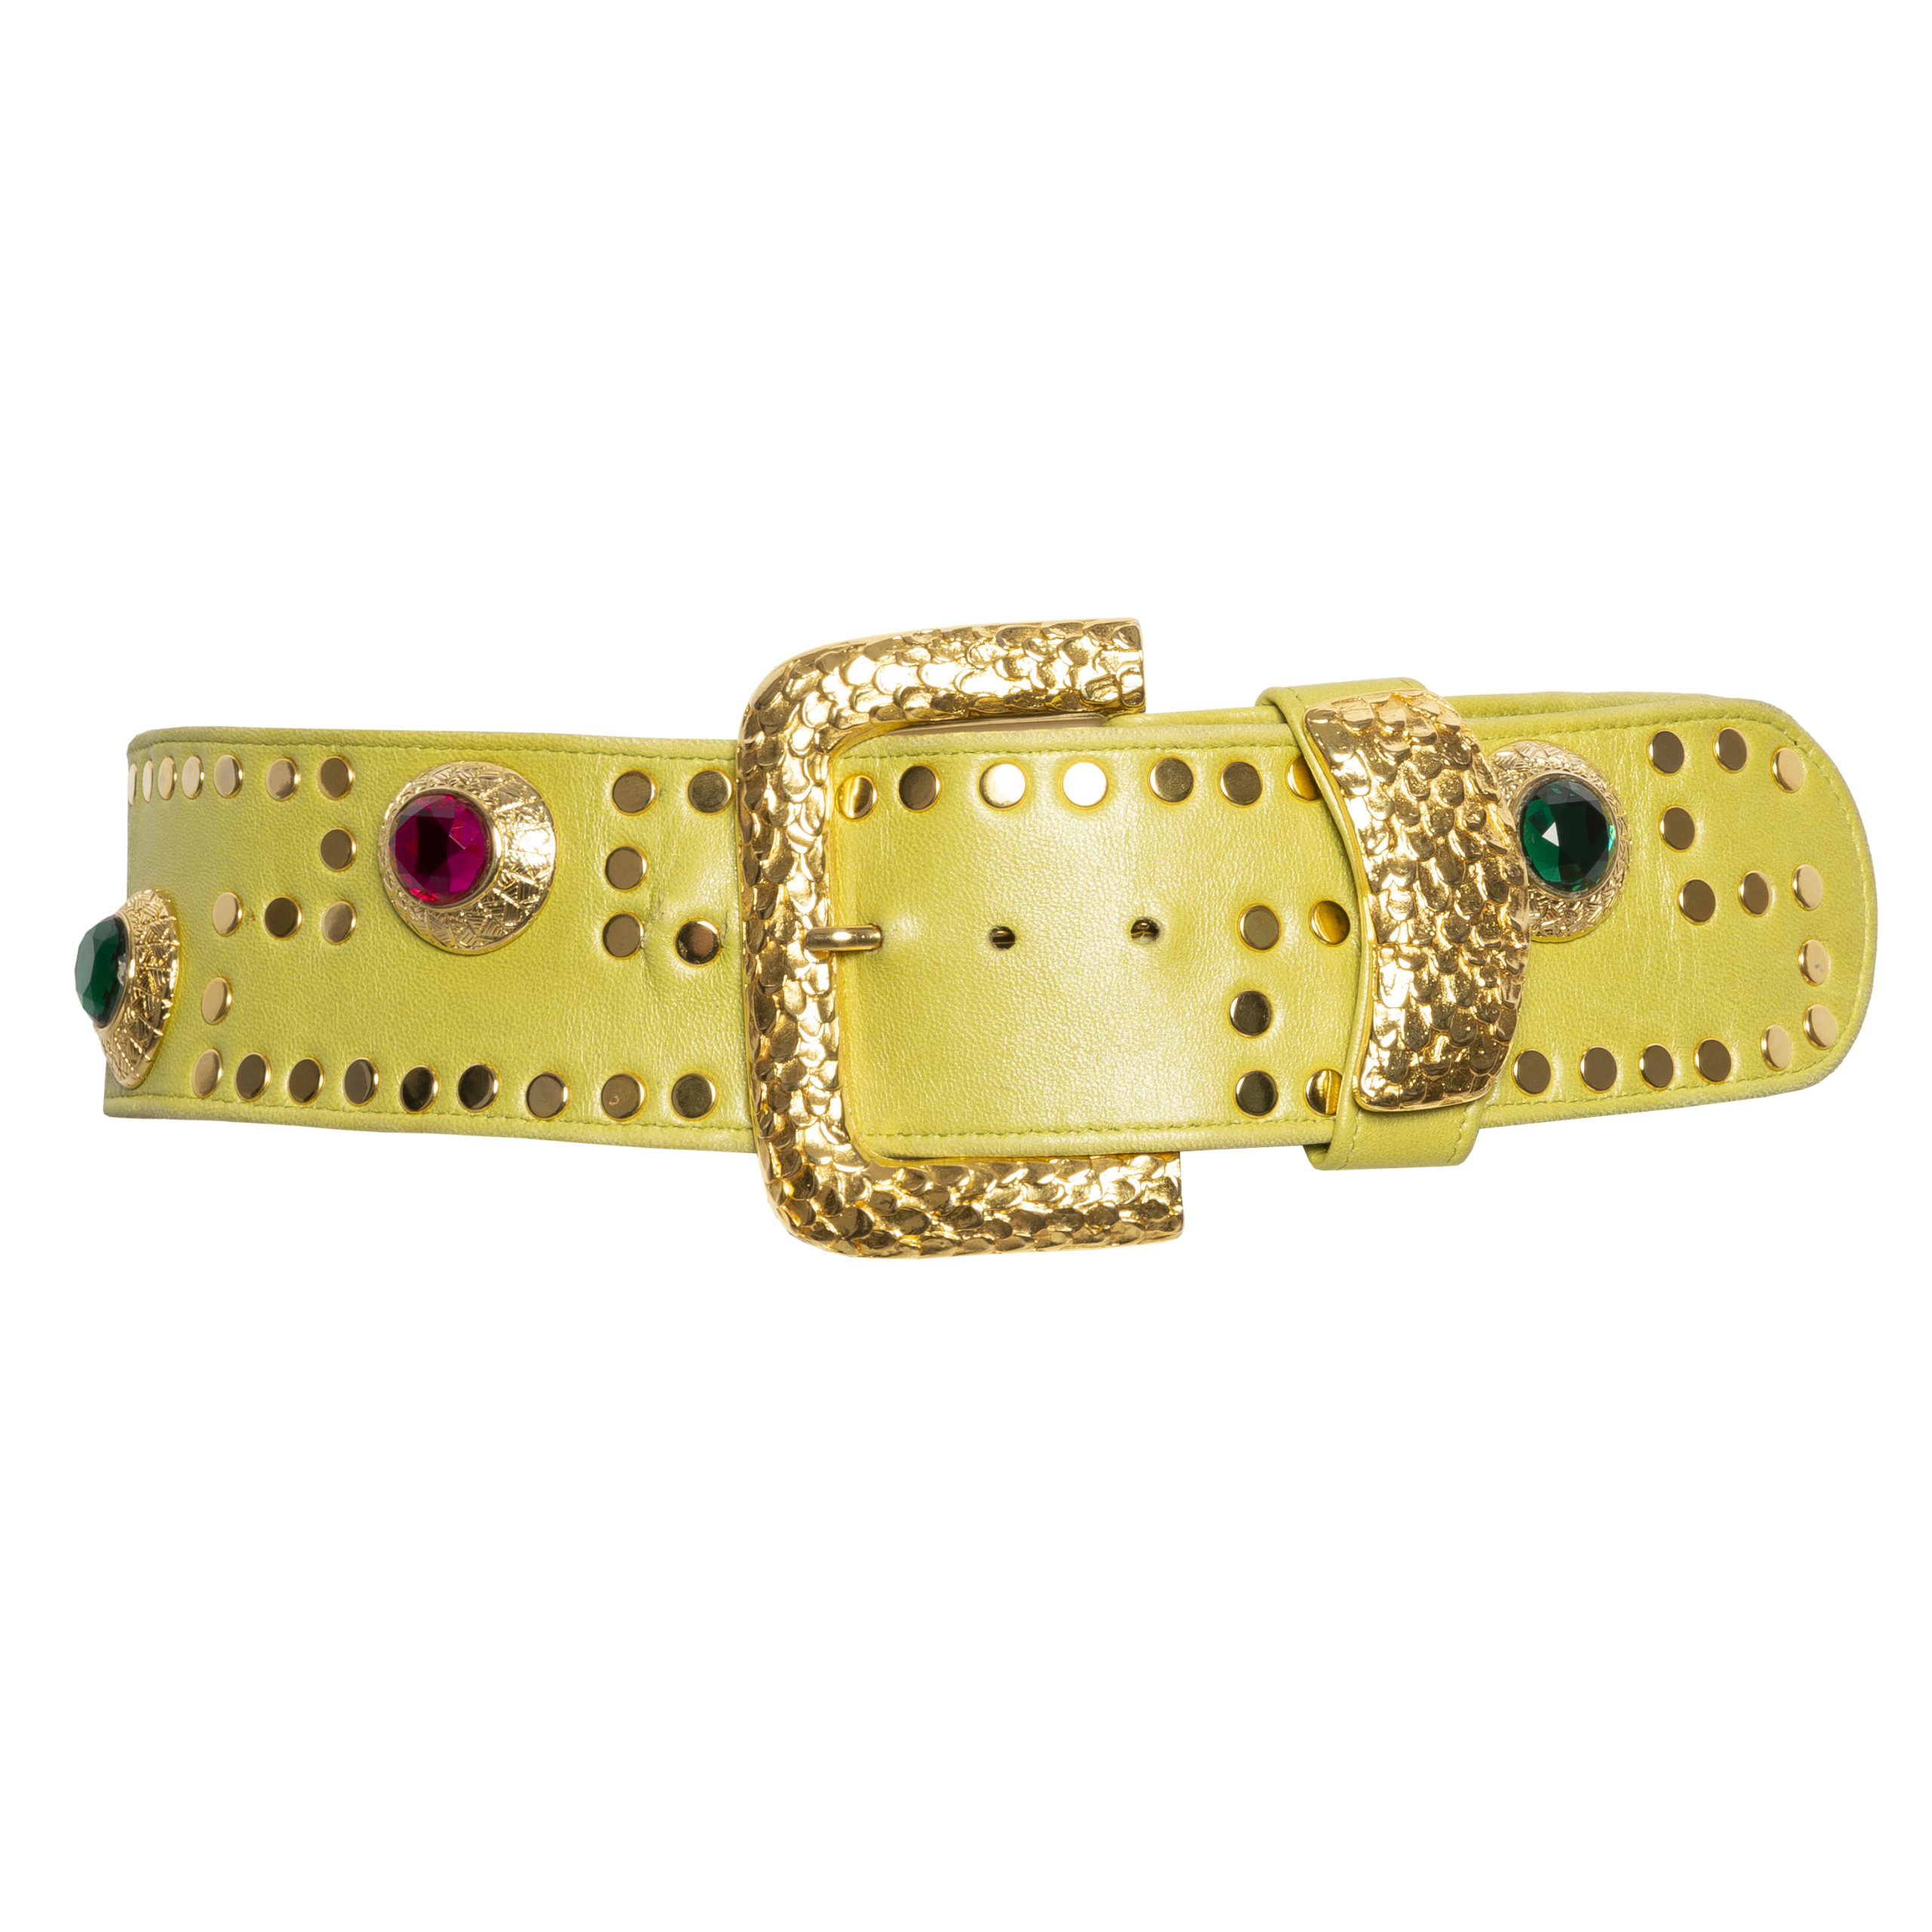 Vintage yellow leather belt with stones